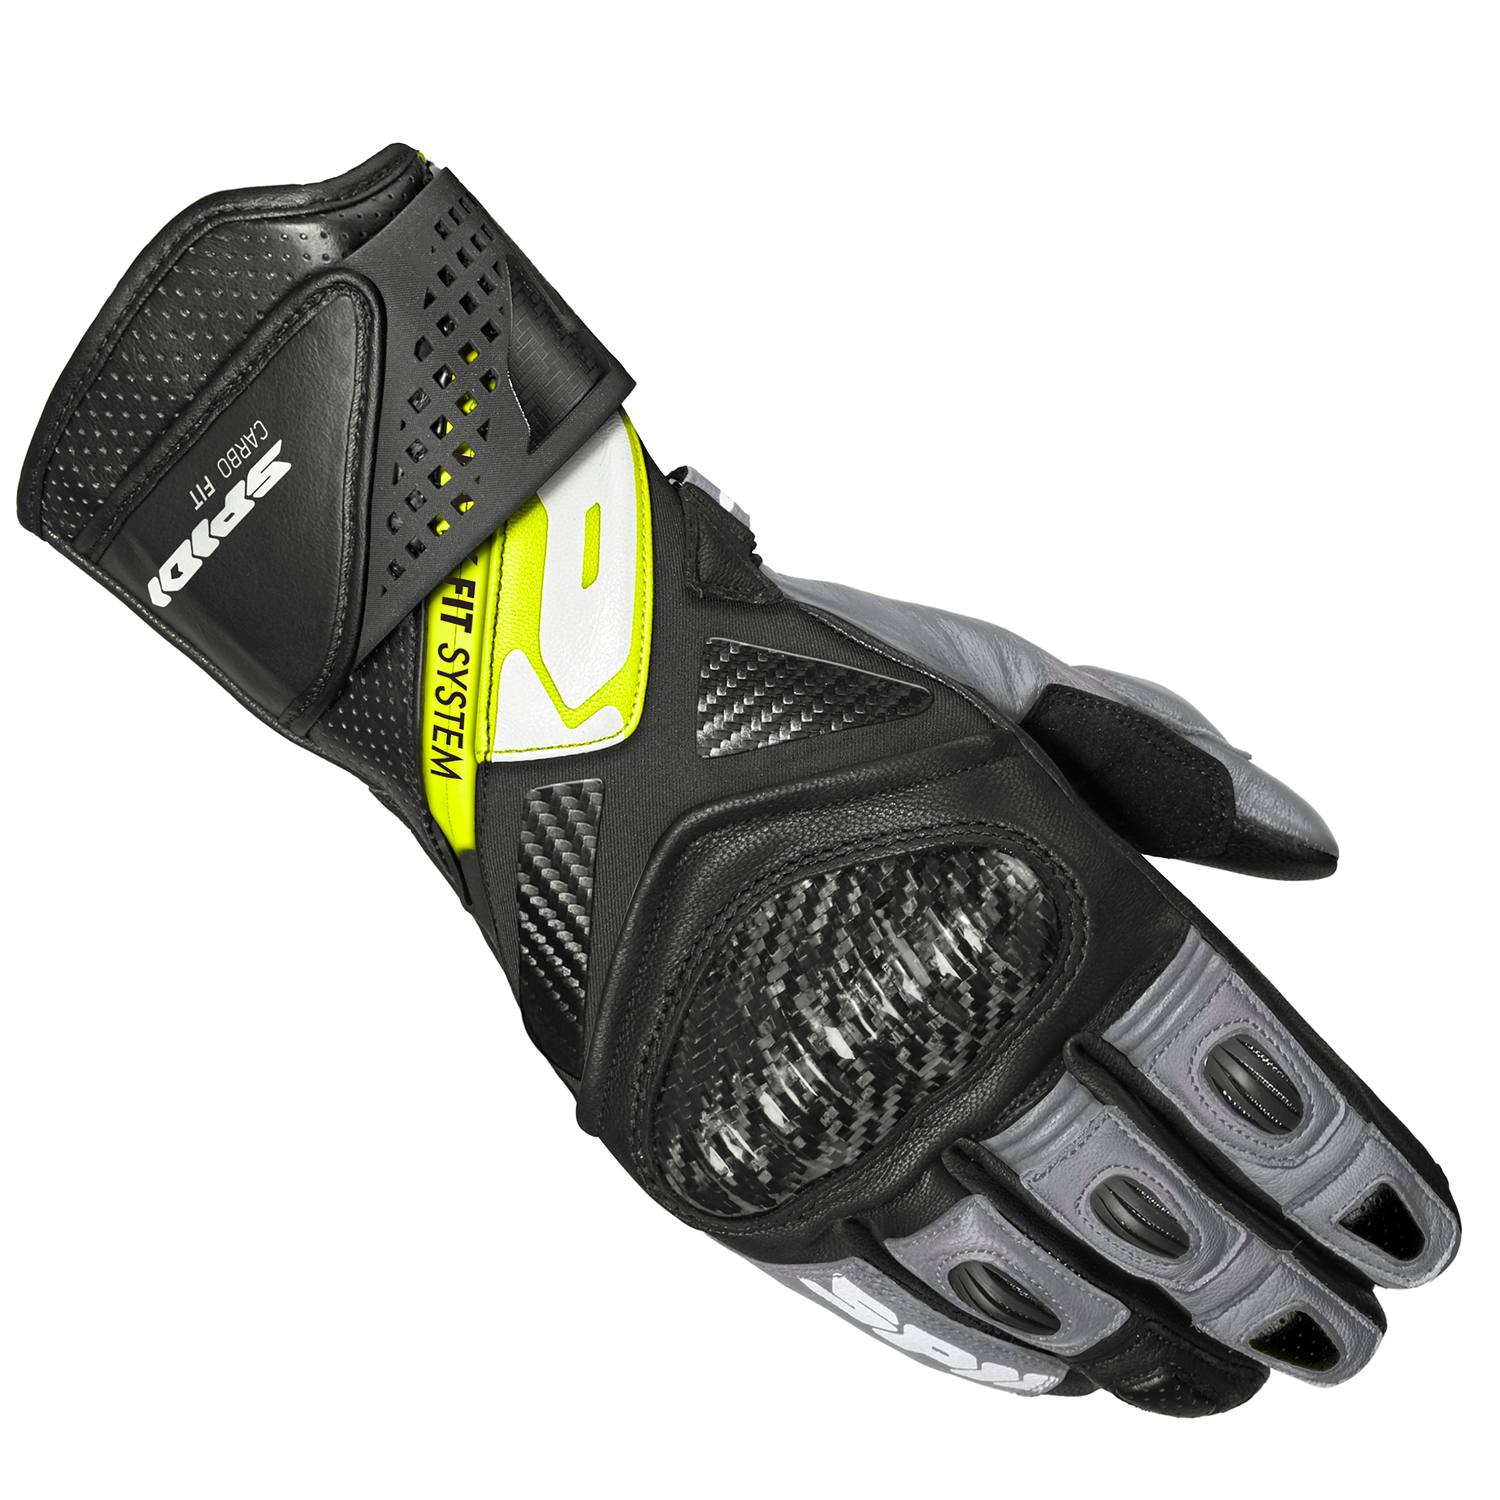 Image of Spidi Carbo Fit Gloves Black Fluorescente Yellow Size 3XL EN